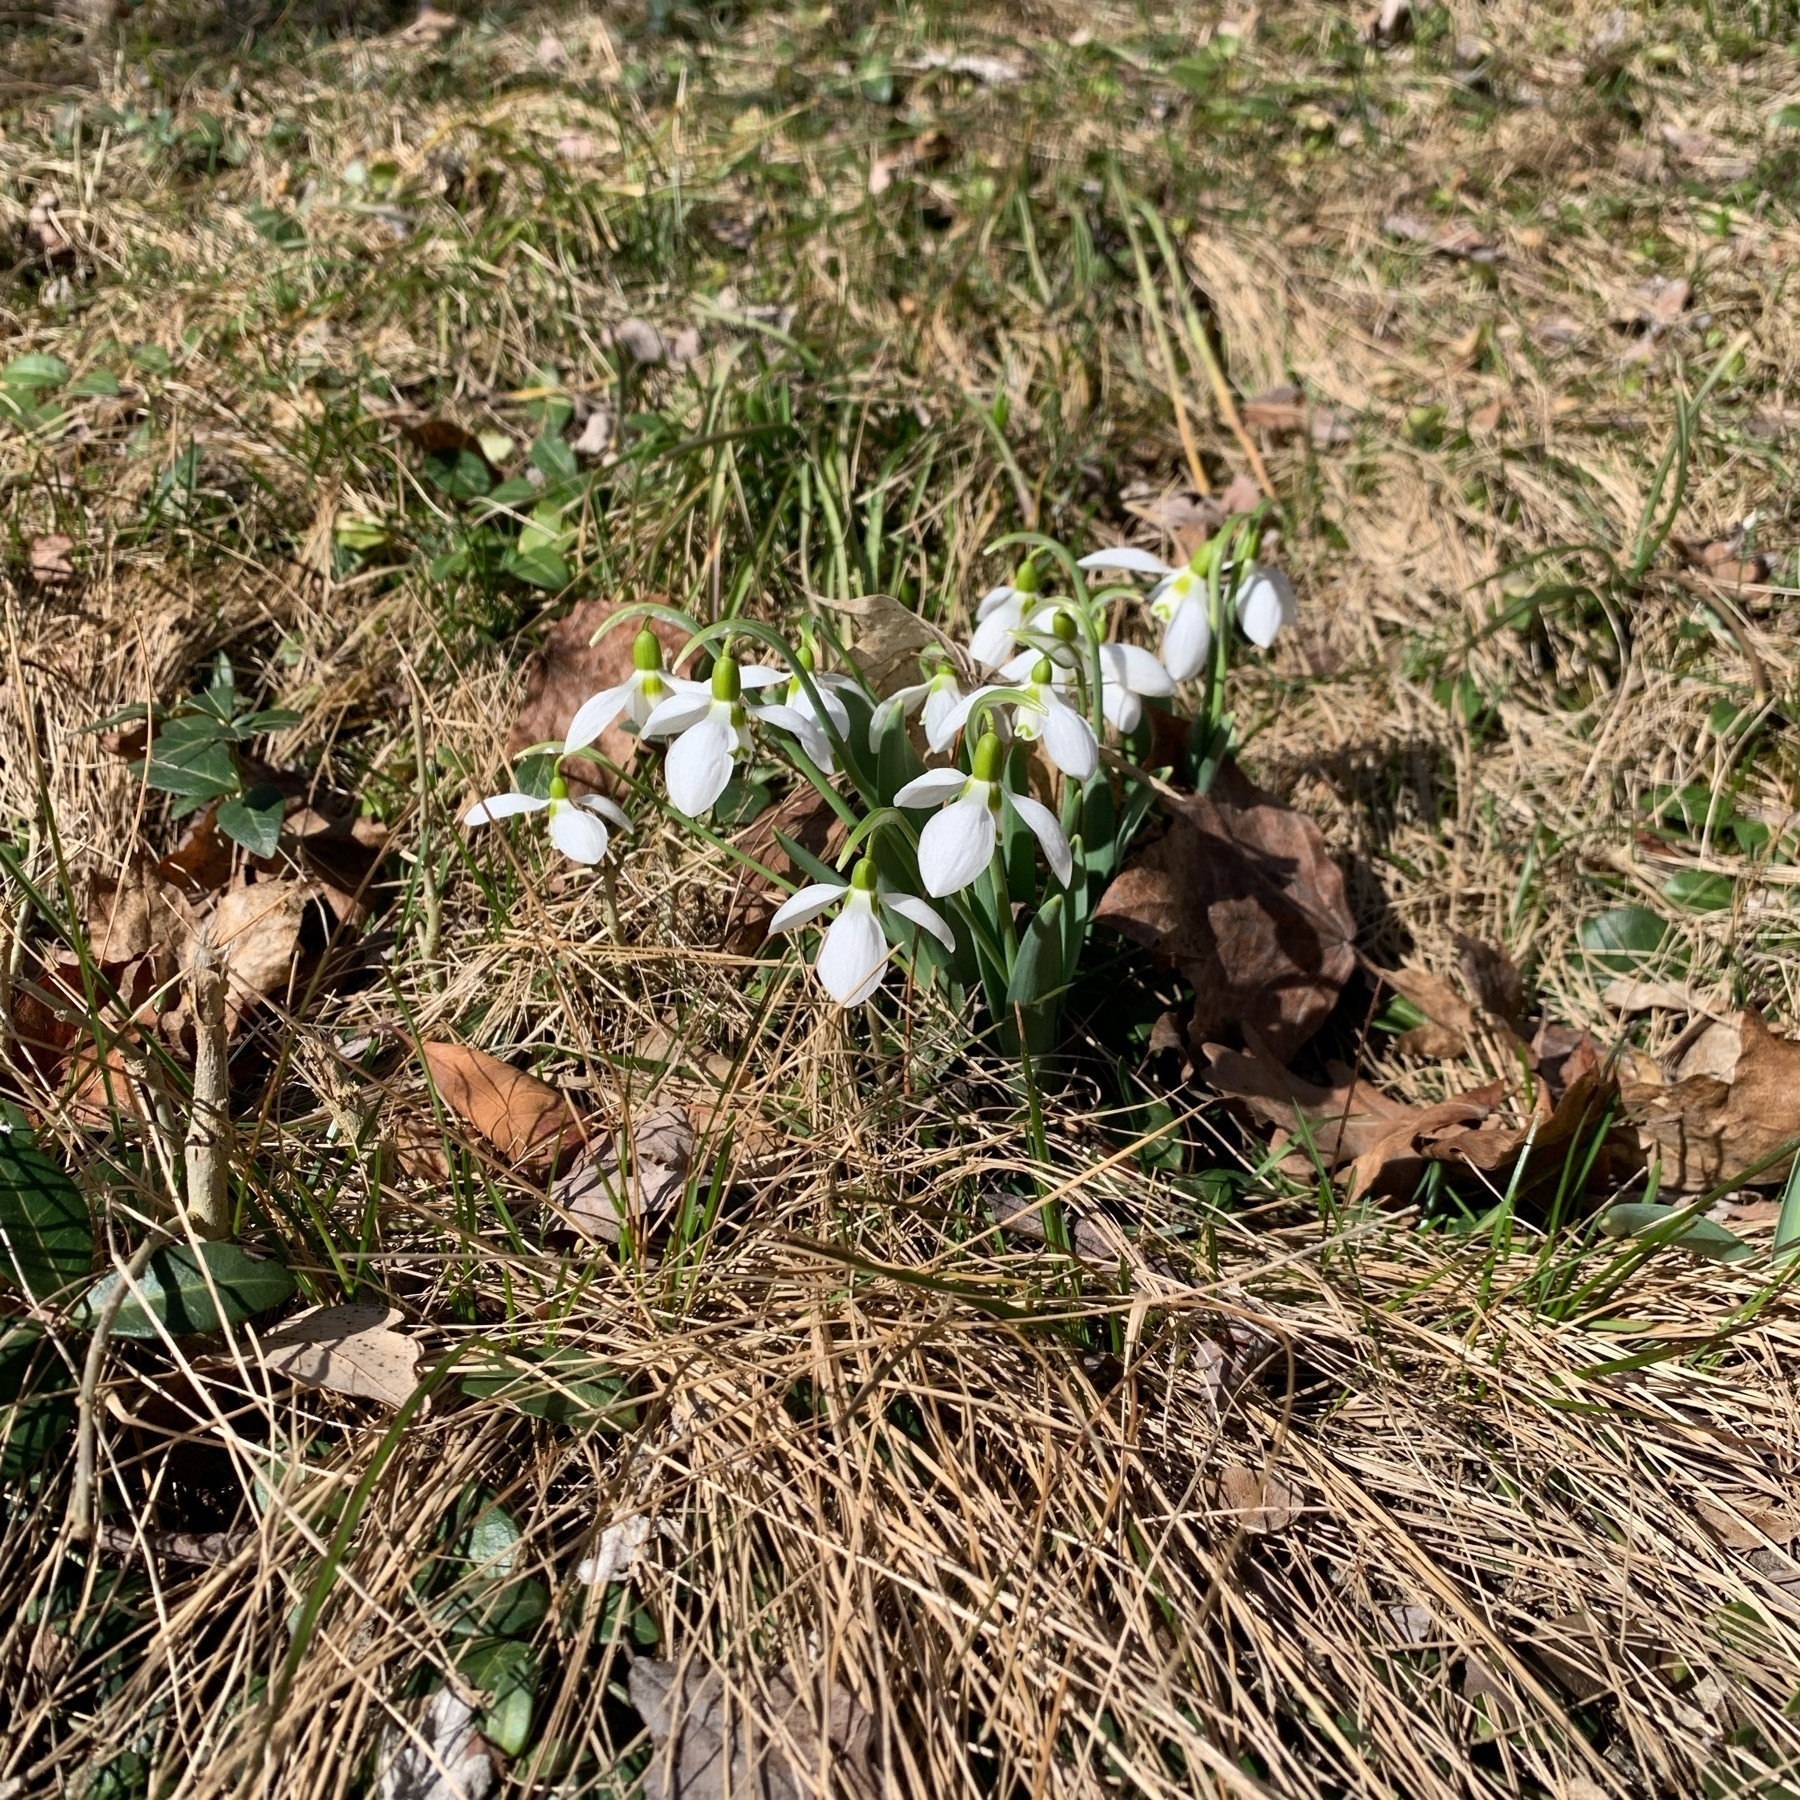 A group of snowdrop flowers among brown grass.